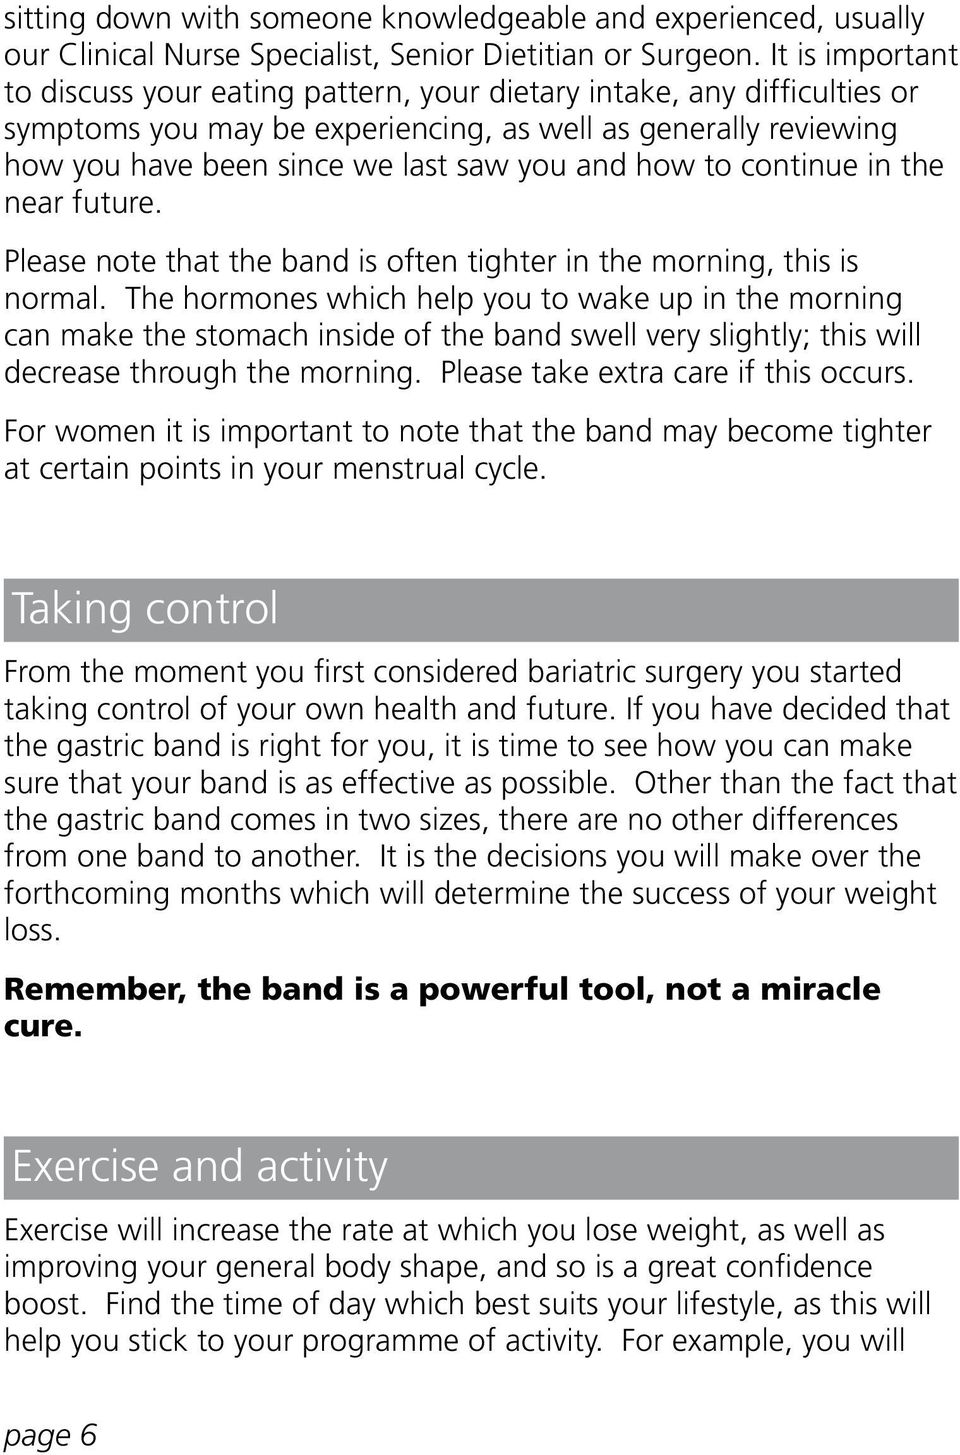 how to continue in the near future. Please note that the band is often tighter in the morning, this is normal.